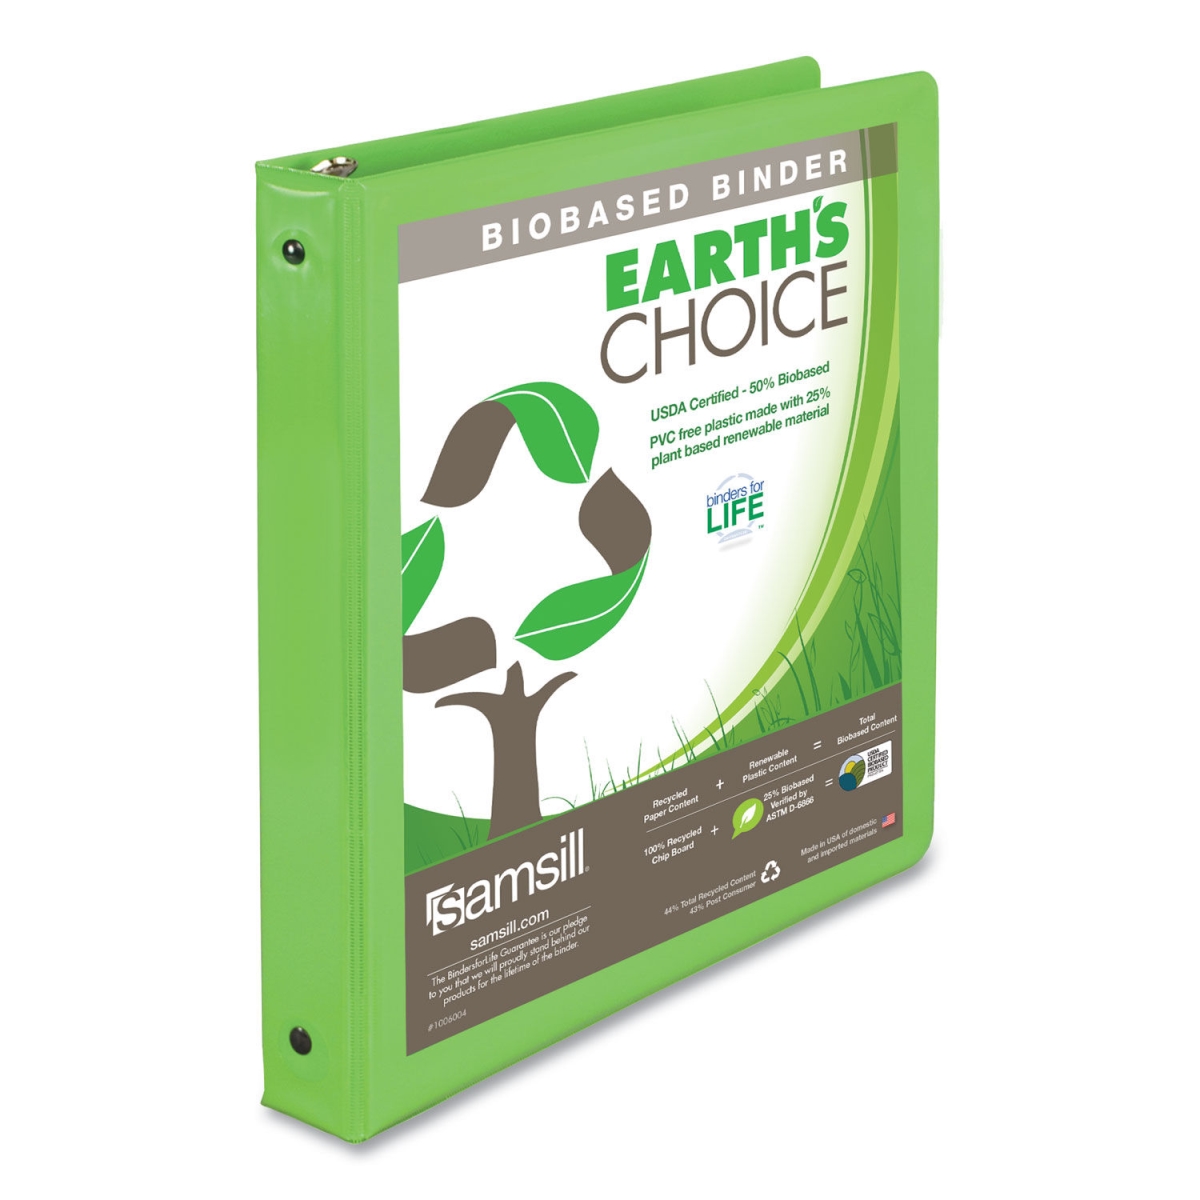 Sam17335 1 In. Earths Choice Biobased Economy Round Ring View Binders, Lime